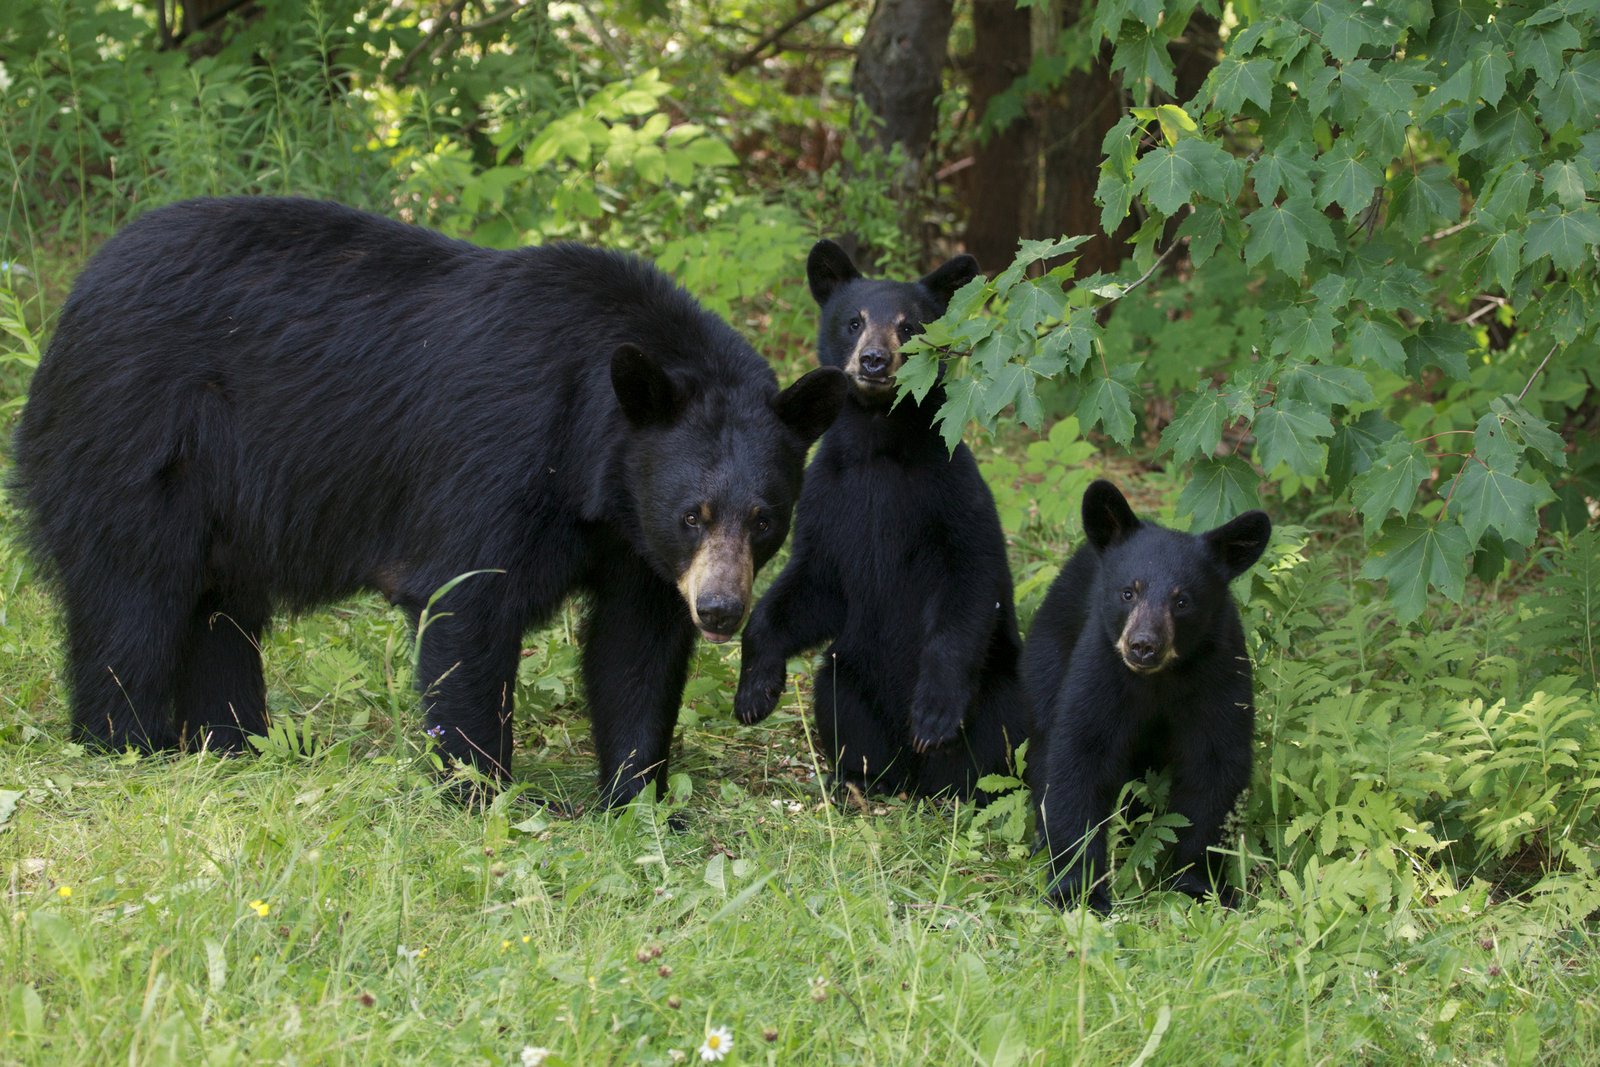 There are at least 600,000 black bears in North America.